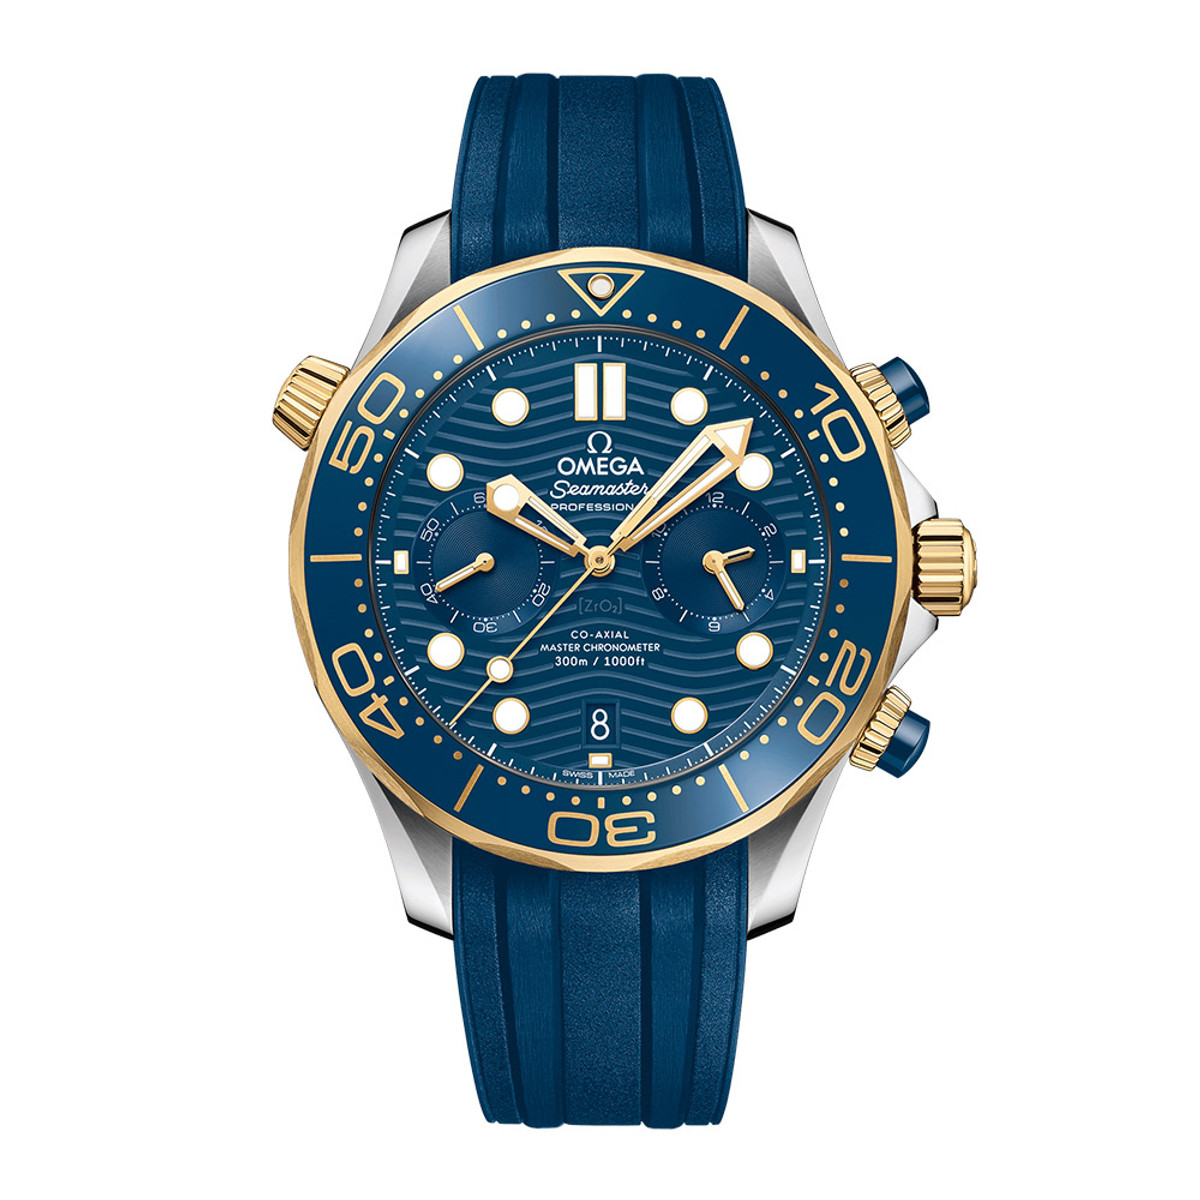 Omega Seamaster Diver 300M Chronograph 18K Yellow Gold & Steel 44mm 210.22.44.51.03.001-WOMG0892